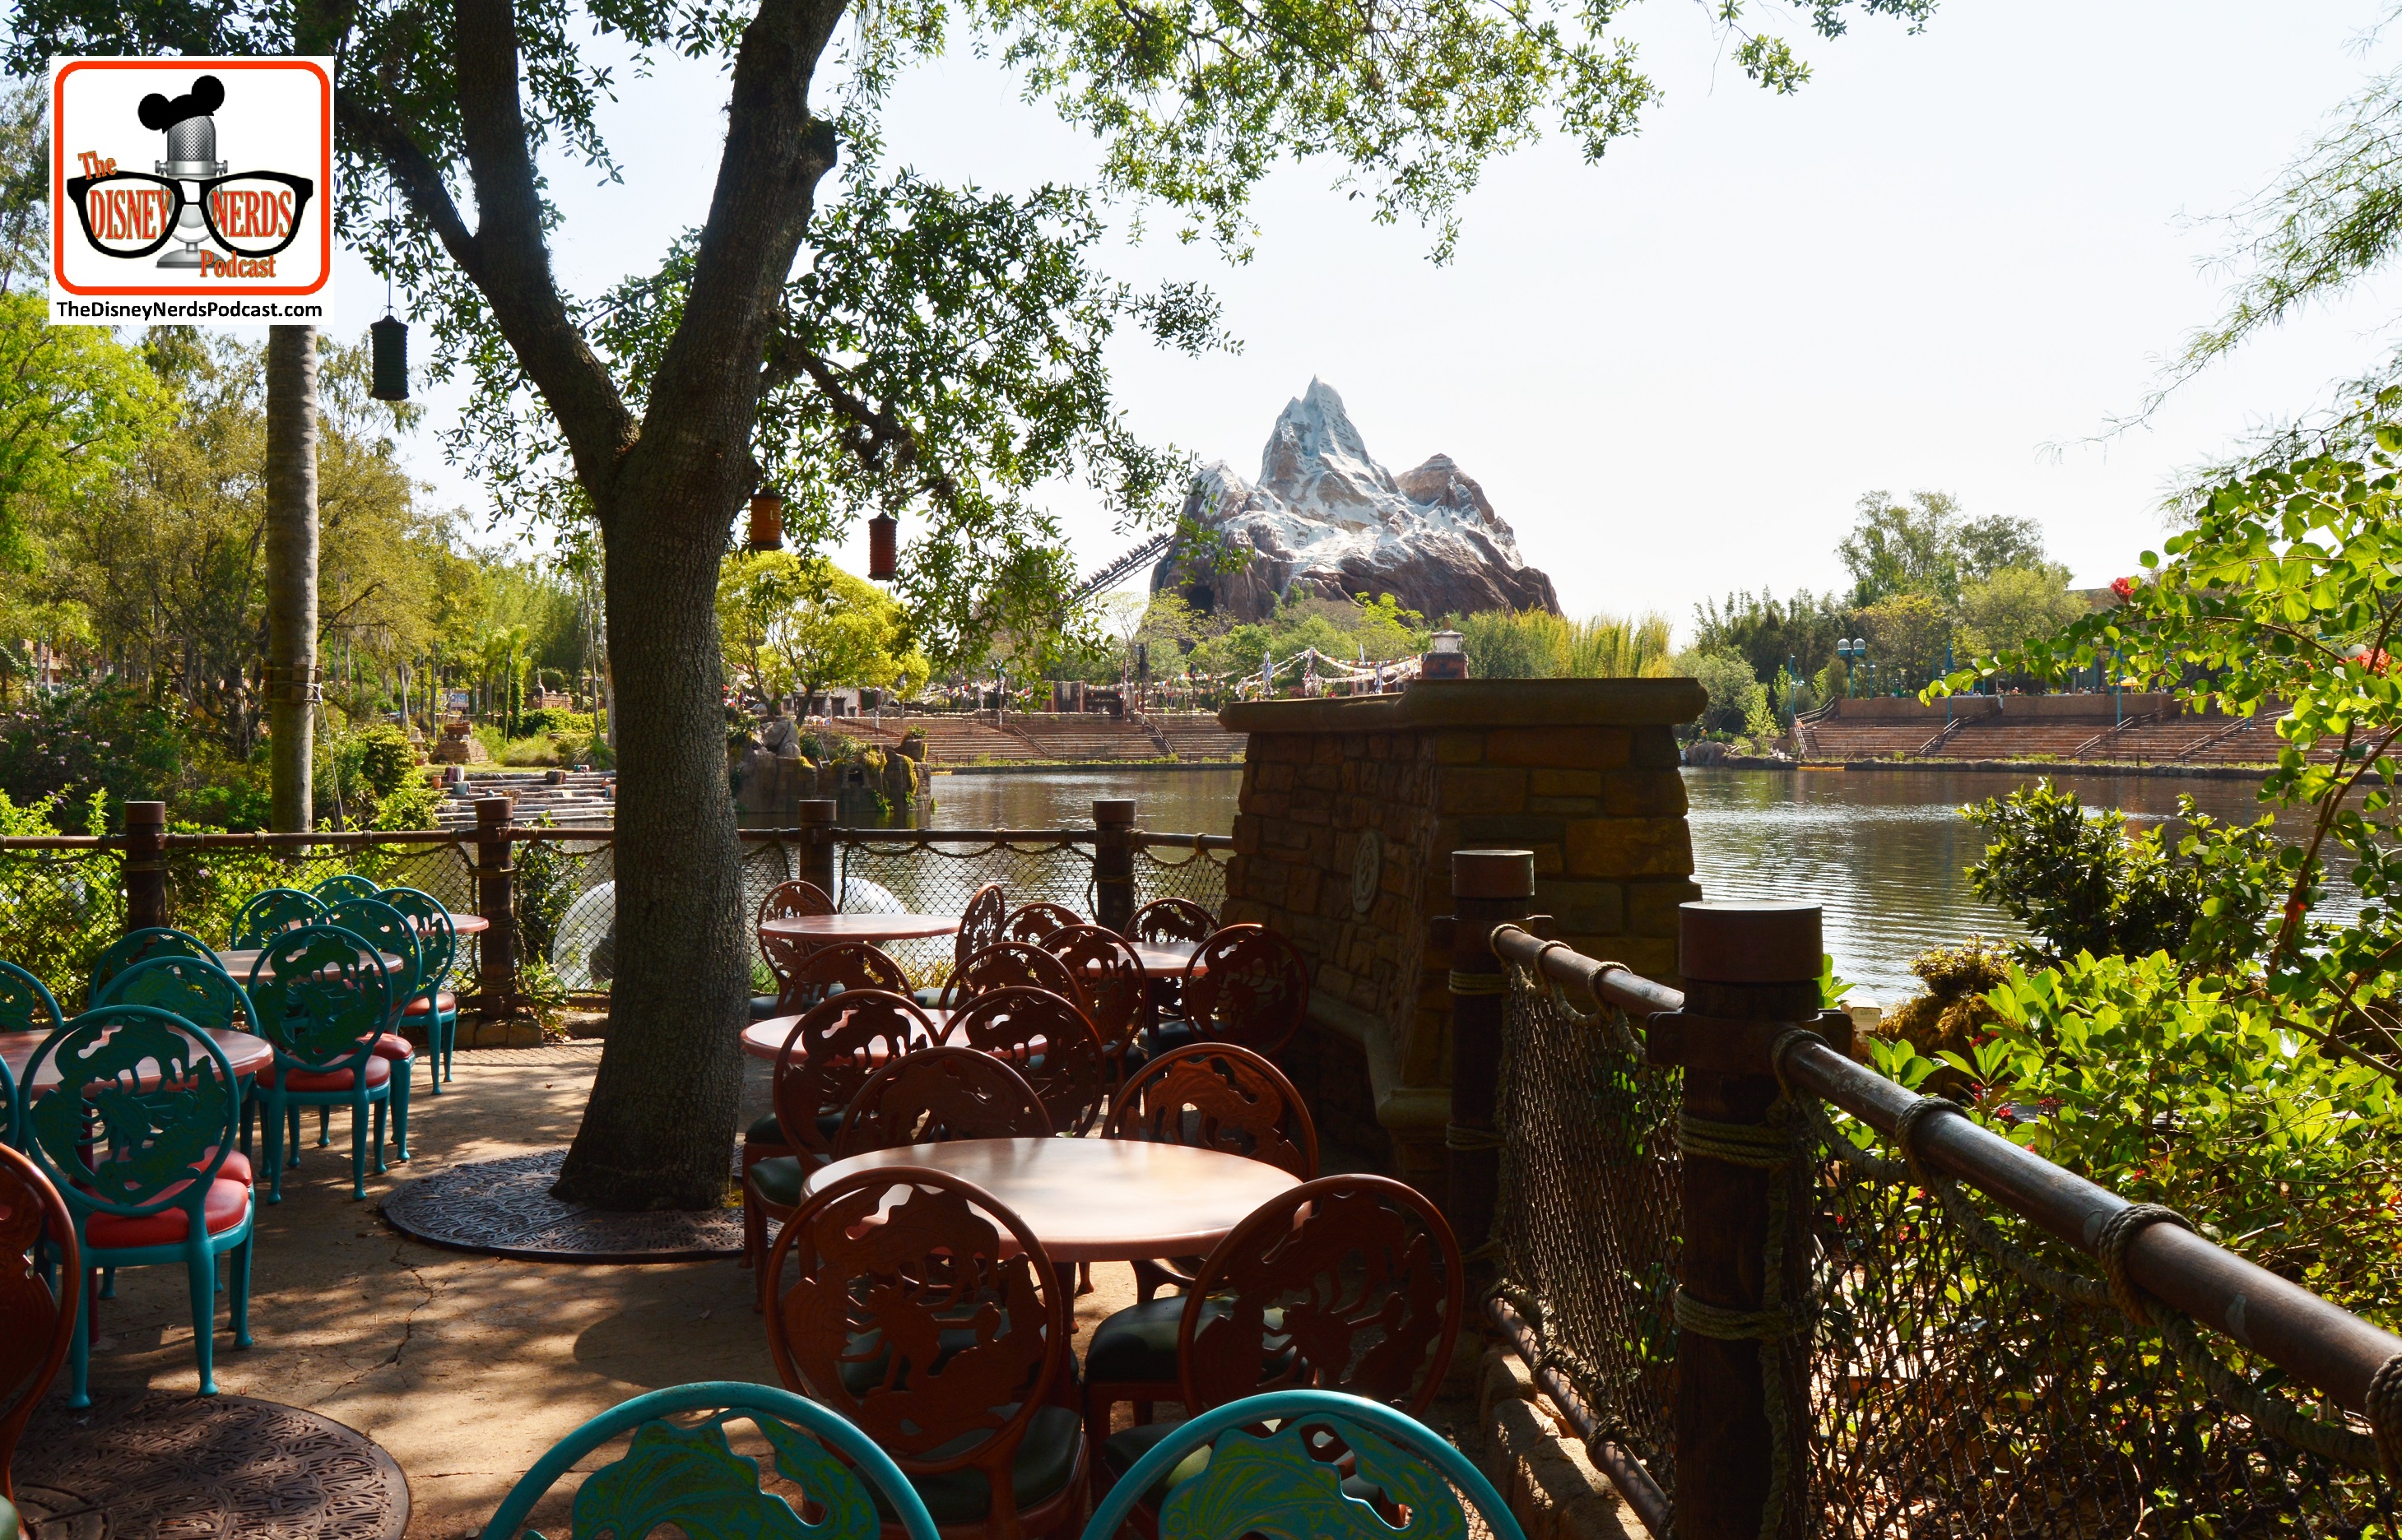 DNP April 2016 Photo Report: Animal Kingdom: Rivers of Light a view from Flame tree Barbecue. - these seats will go fast I'm sure.